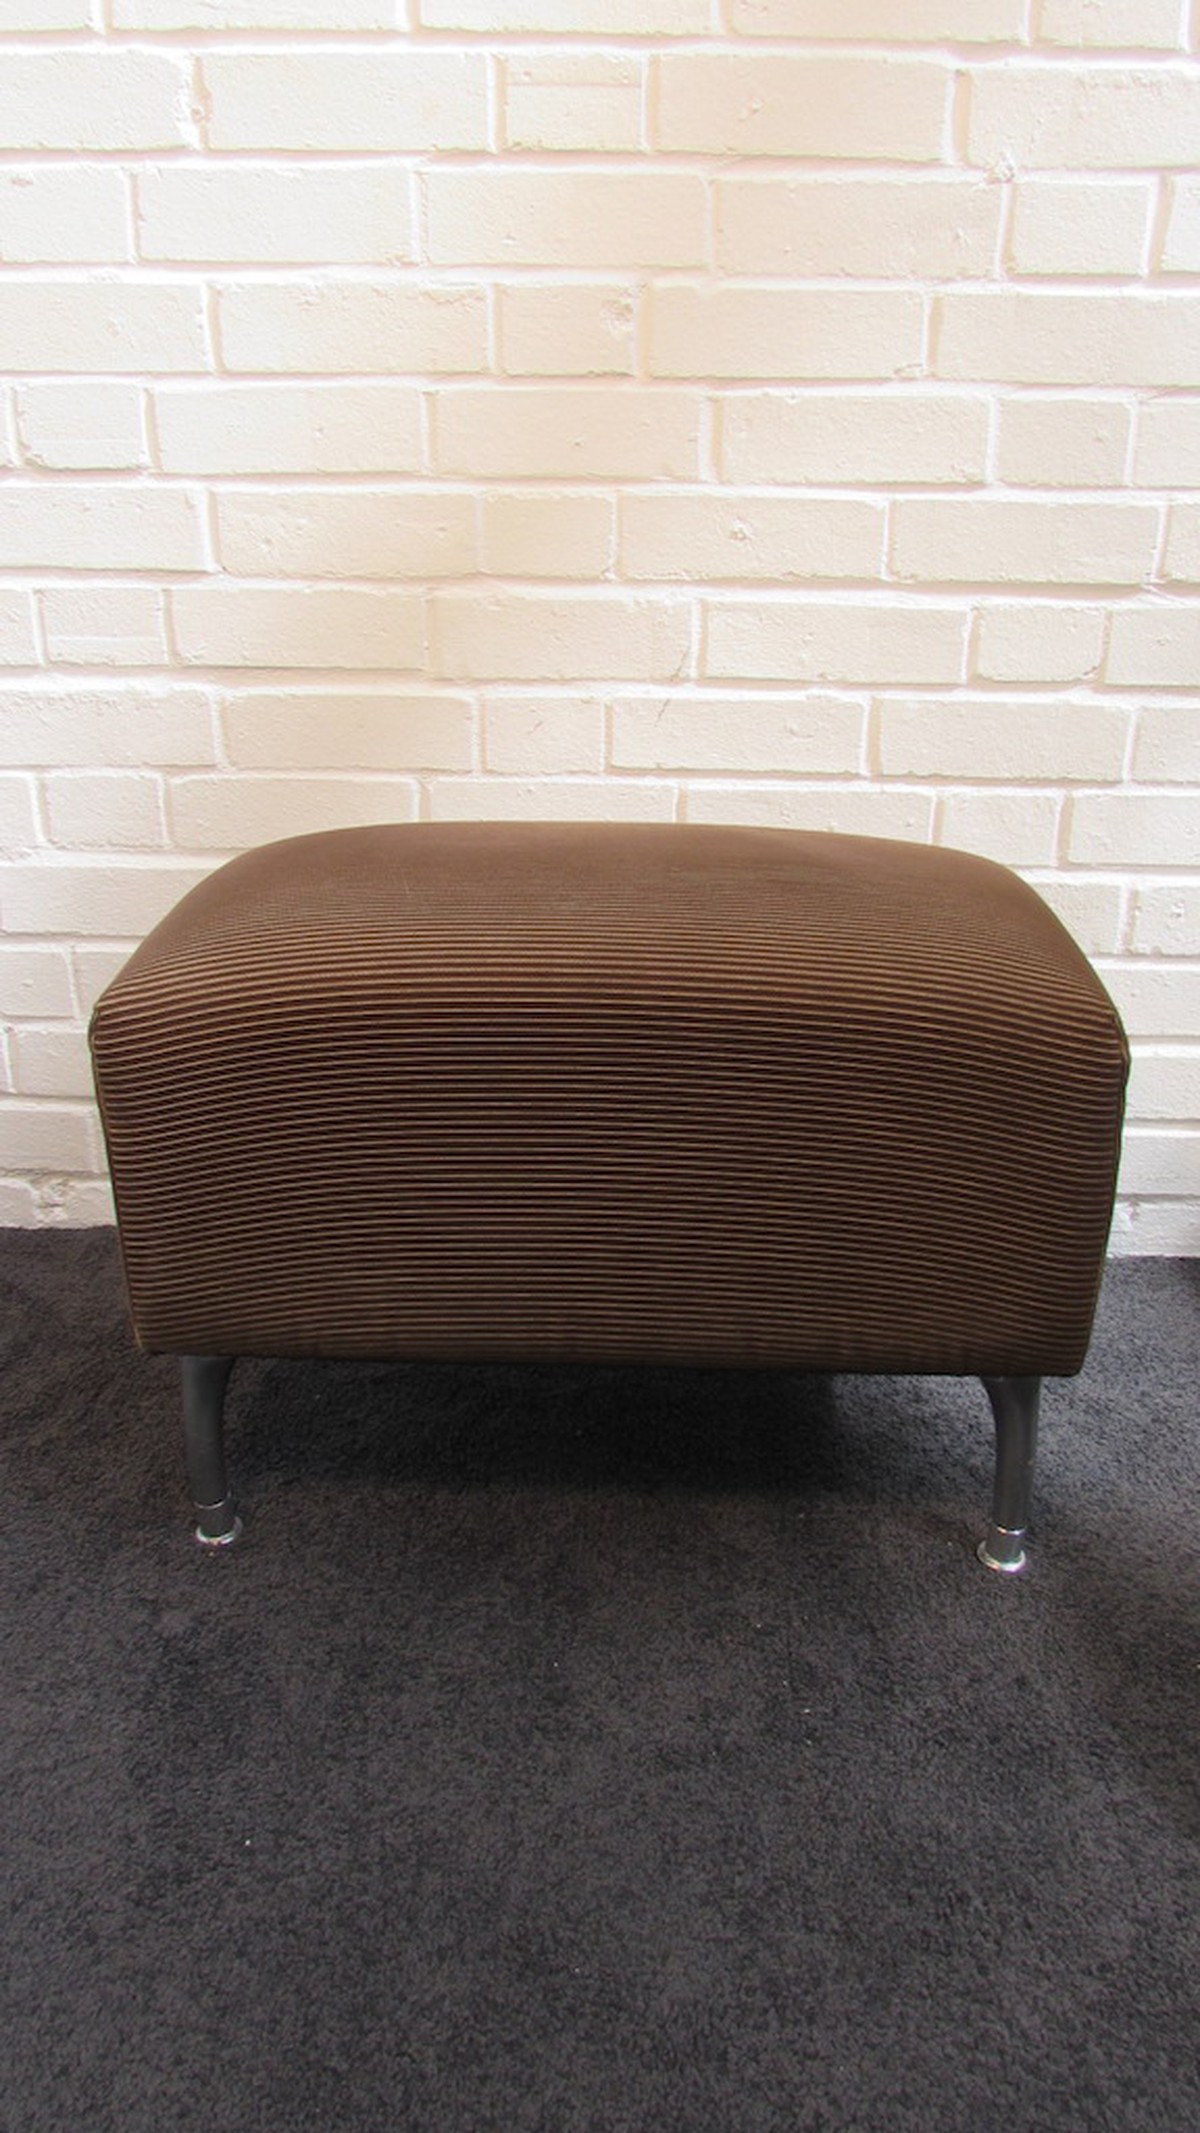 Secondhand Hotel Furniture | Lounge and Bar | 10x Brown & Beige Cord ...